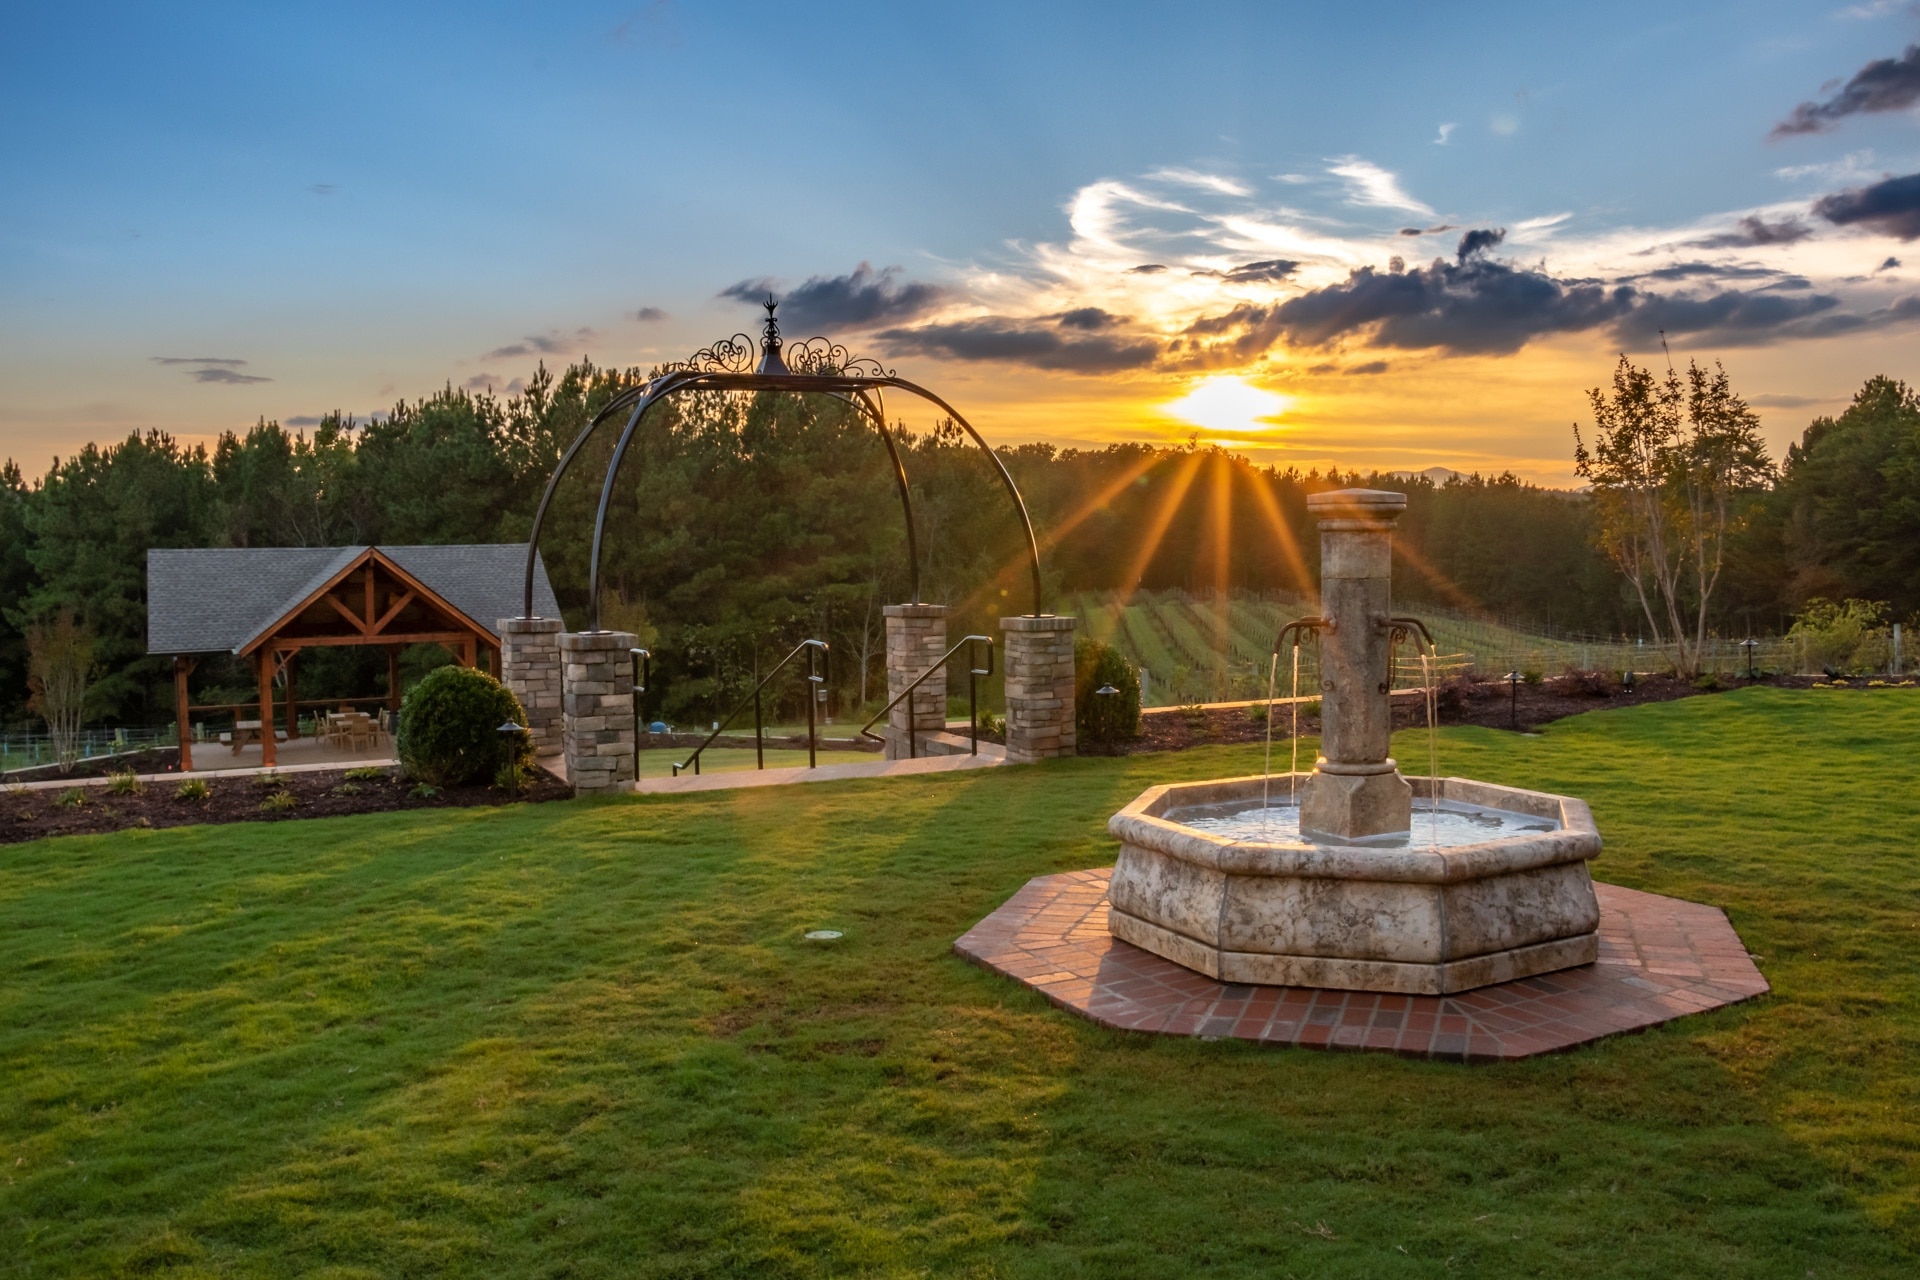 Mountain Brook Vineyards is one of five wineries within an 8 mile section of Tryon North Carolina. To learn more about this winery region, please visit:  https://www.tryonwines.com

#Golden